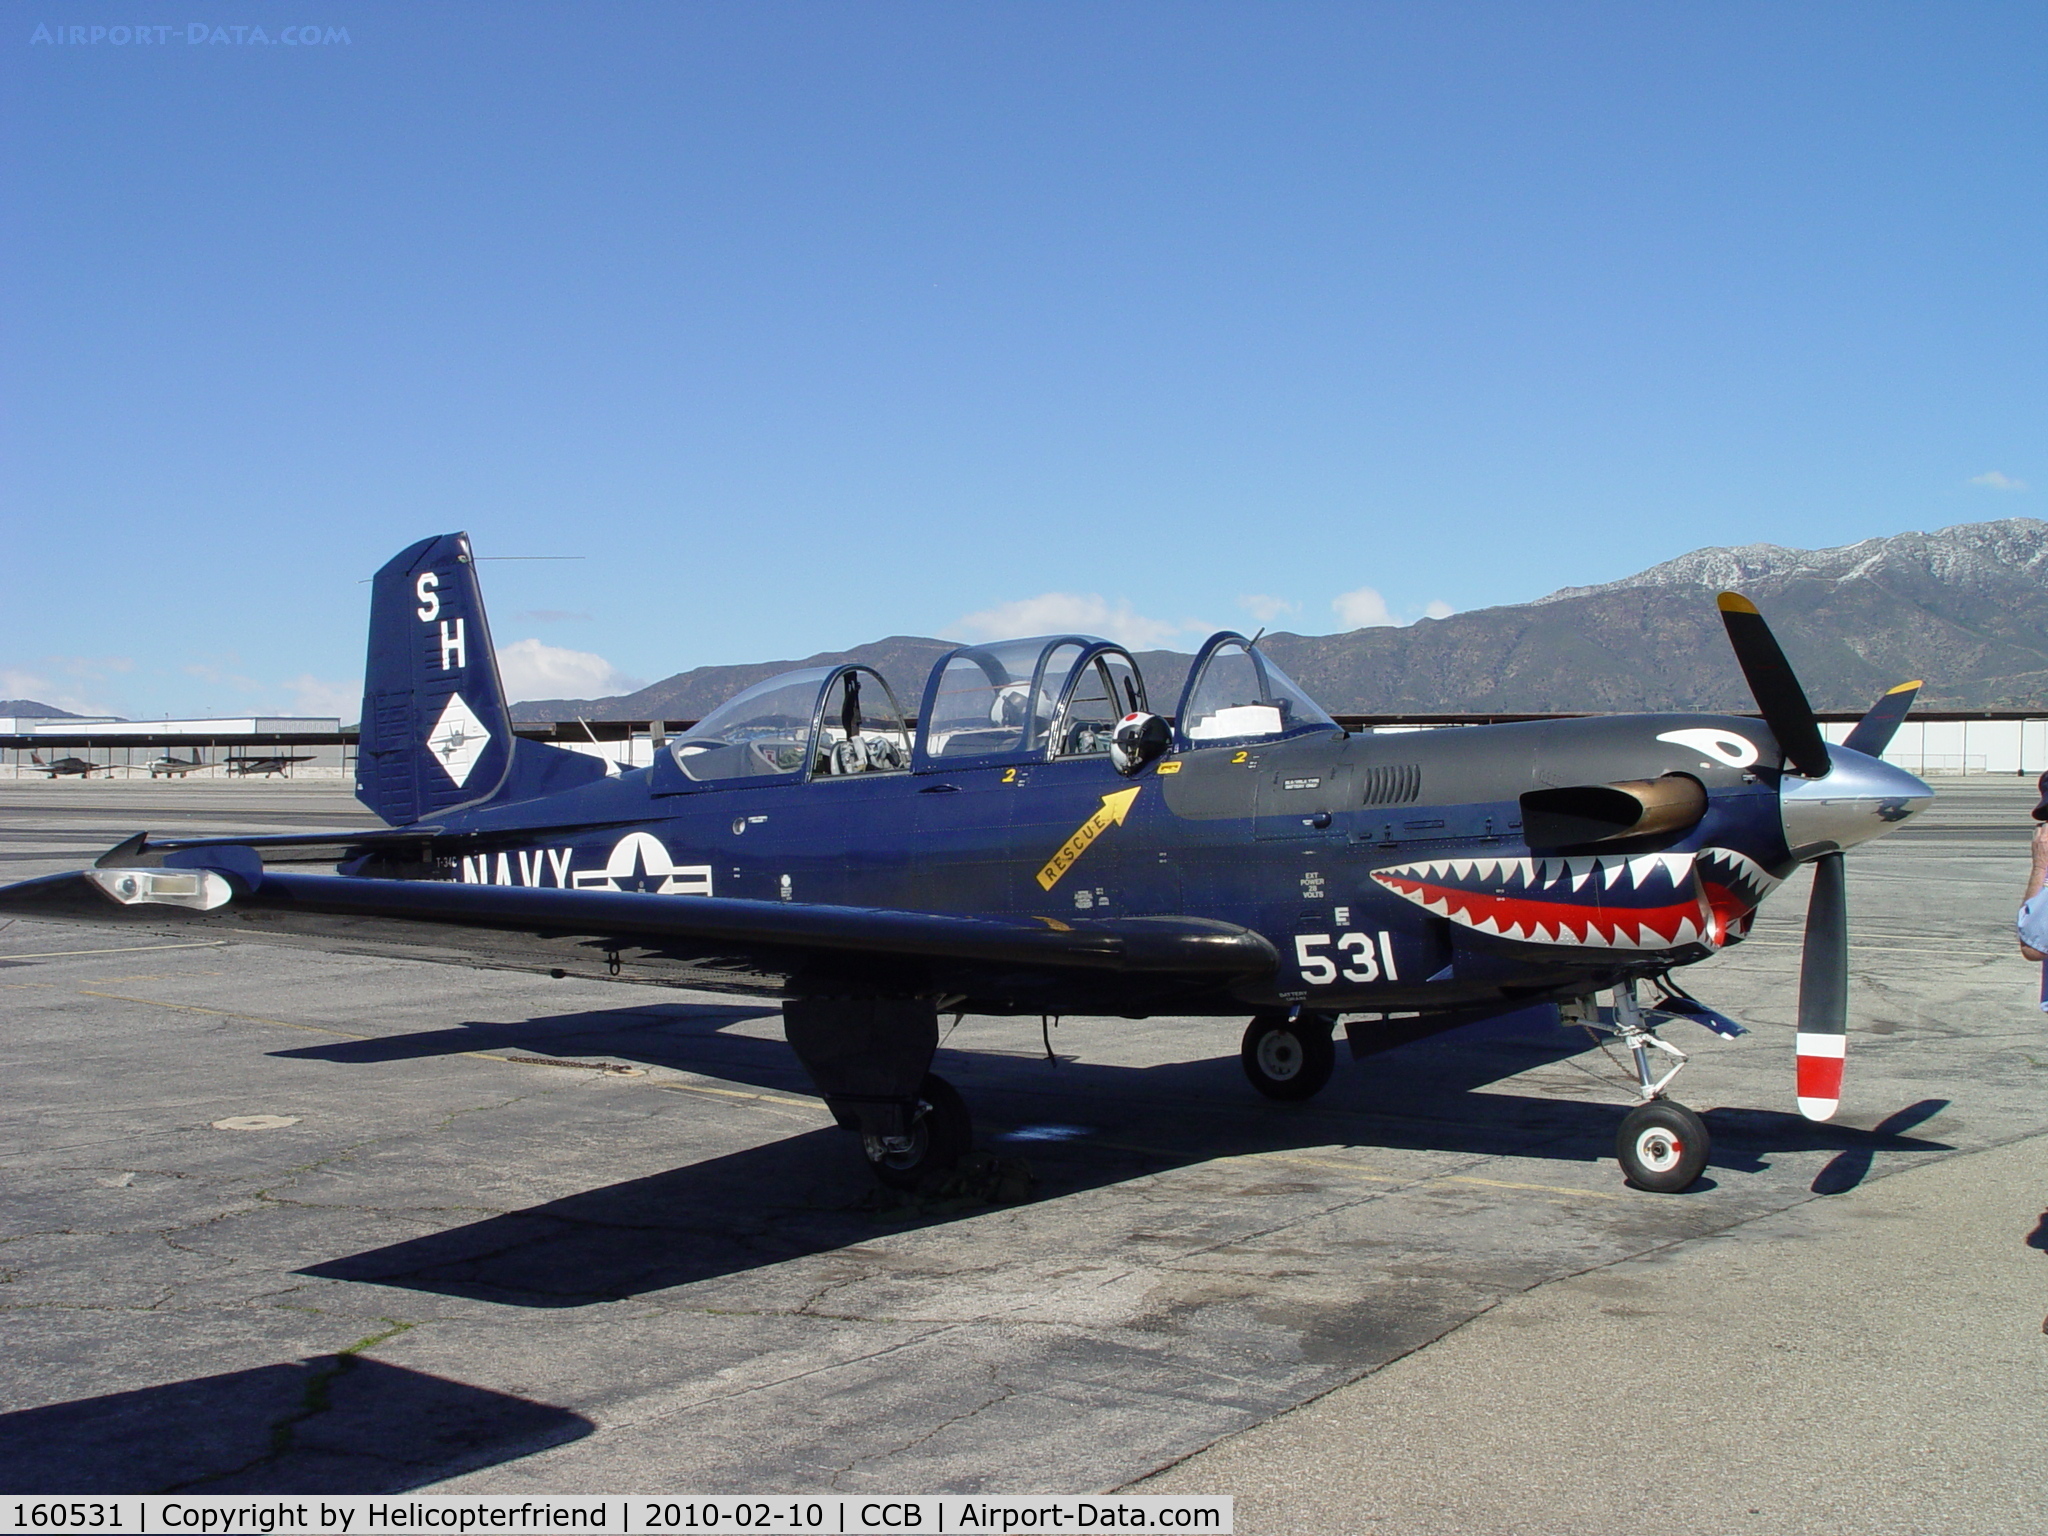 160531, Beech T-34C Turbo Mentor C/N GL-88, Originally built by Beech, operational in 1977, cost $1,000,000.00, propelled by PT6A-25 turbo prop Pratt & Whitney of Canada, 28 ft 9 in long, wing span 33 ft 5 in, empty weight 3000 lb, airspeed max 280 knots, ceiling 25,000 ft, range 600 nautical miles